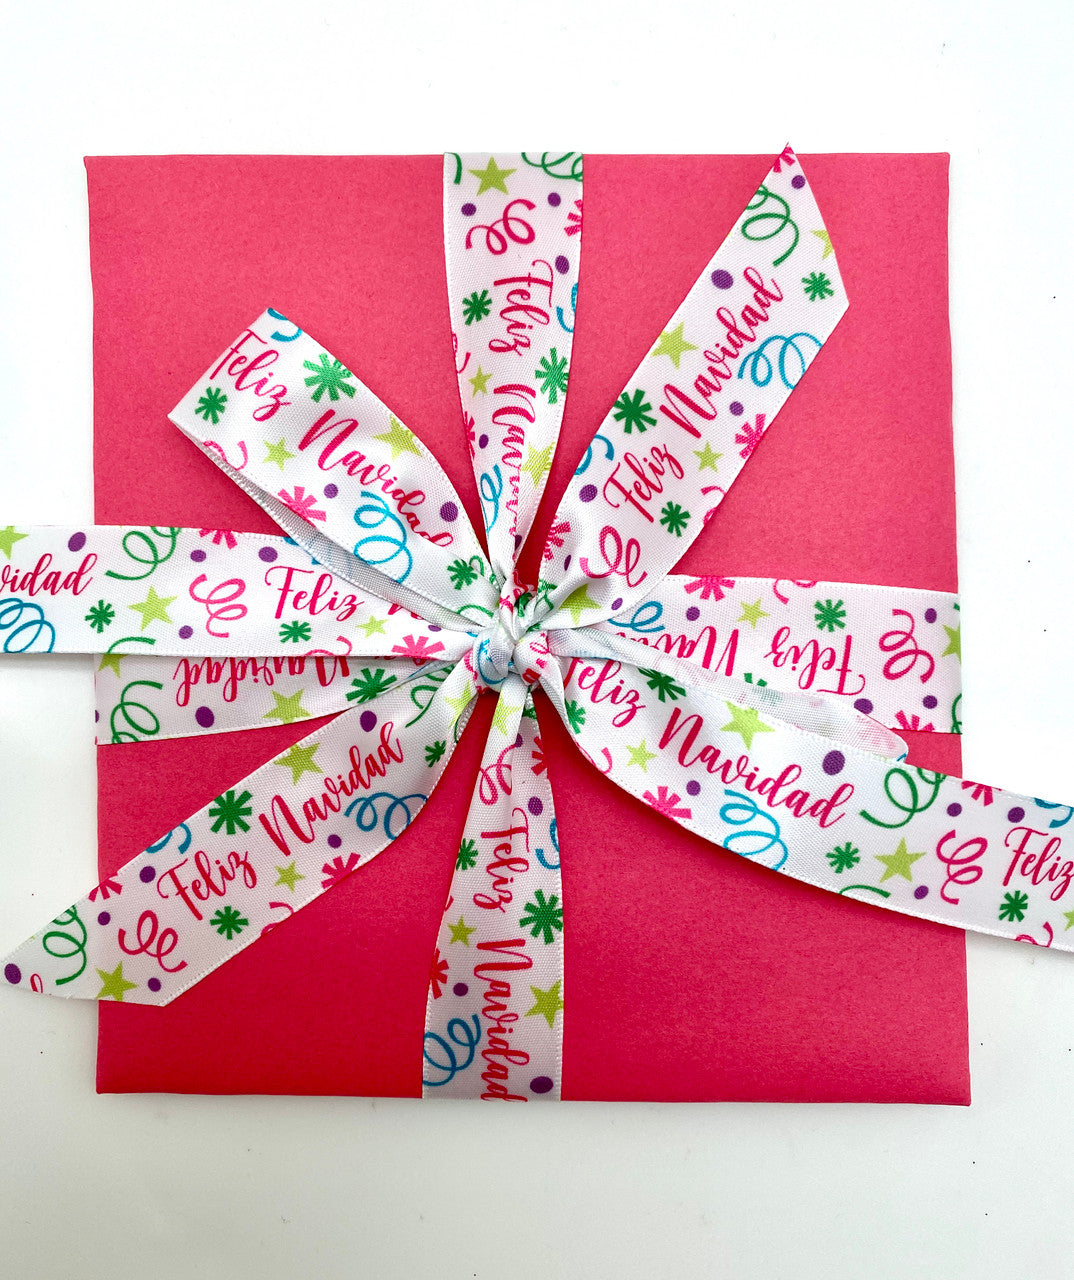 Wrap a festive gift in pink to add warmth and fun to your holiday packages!